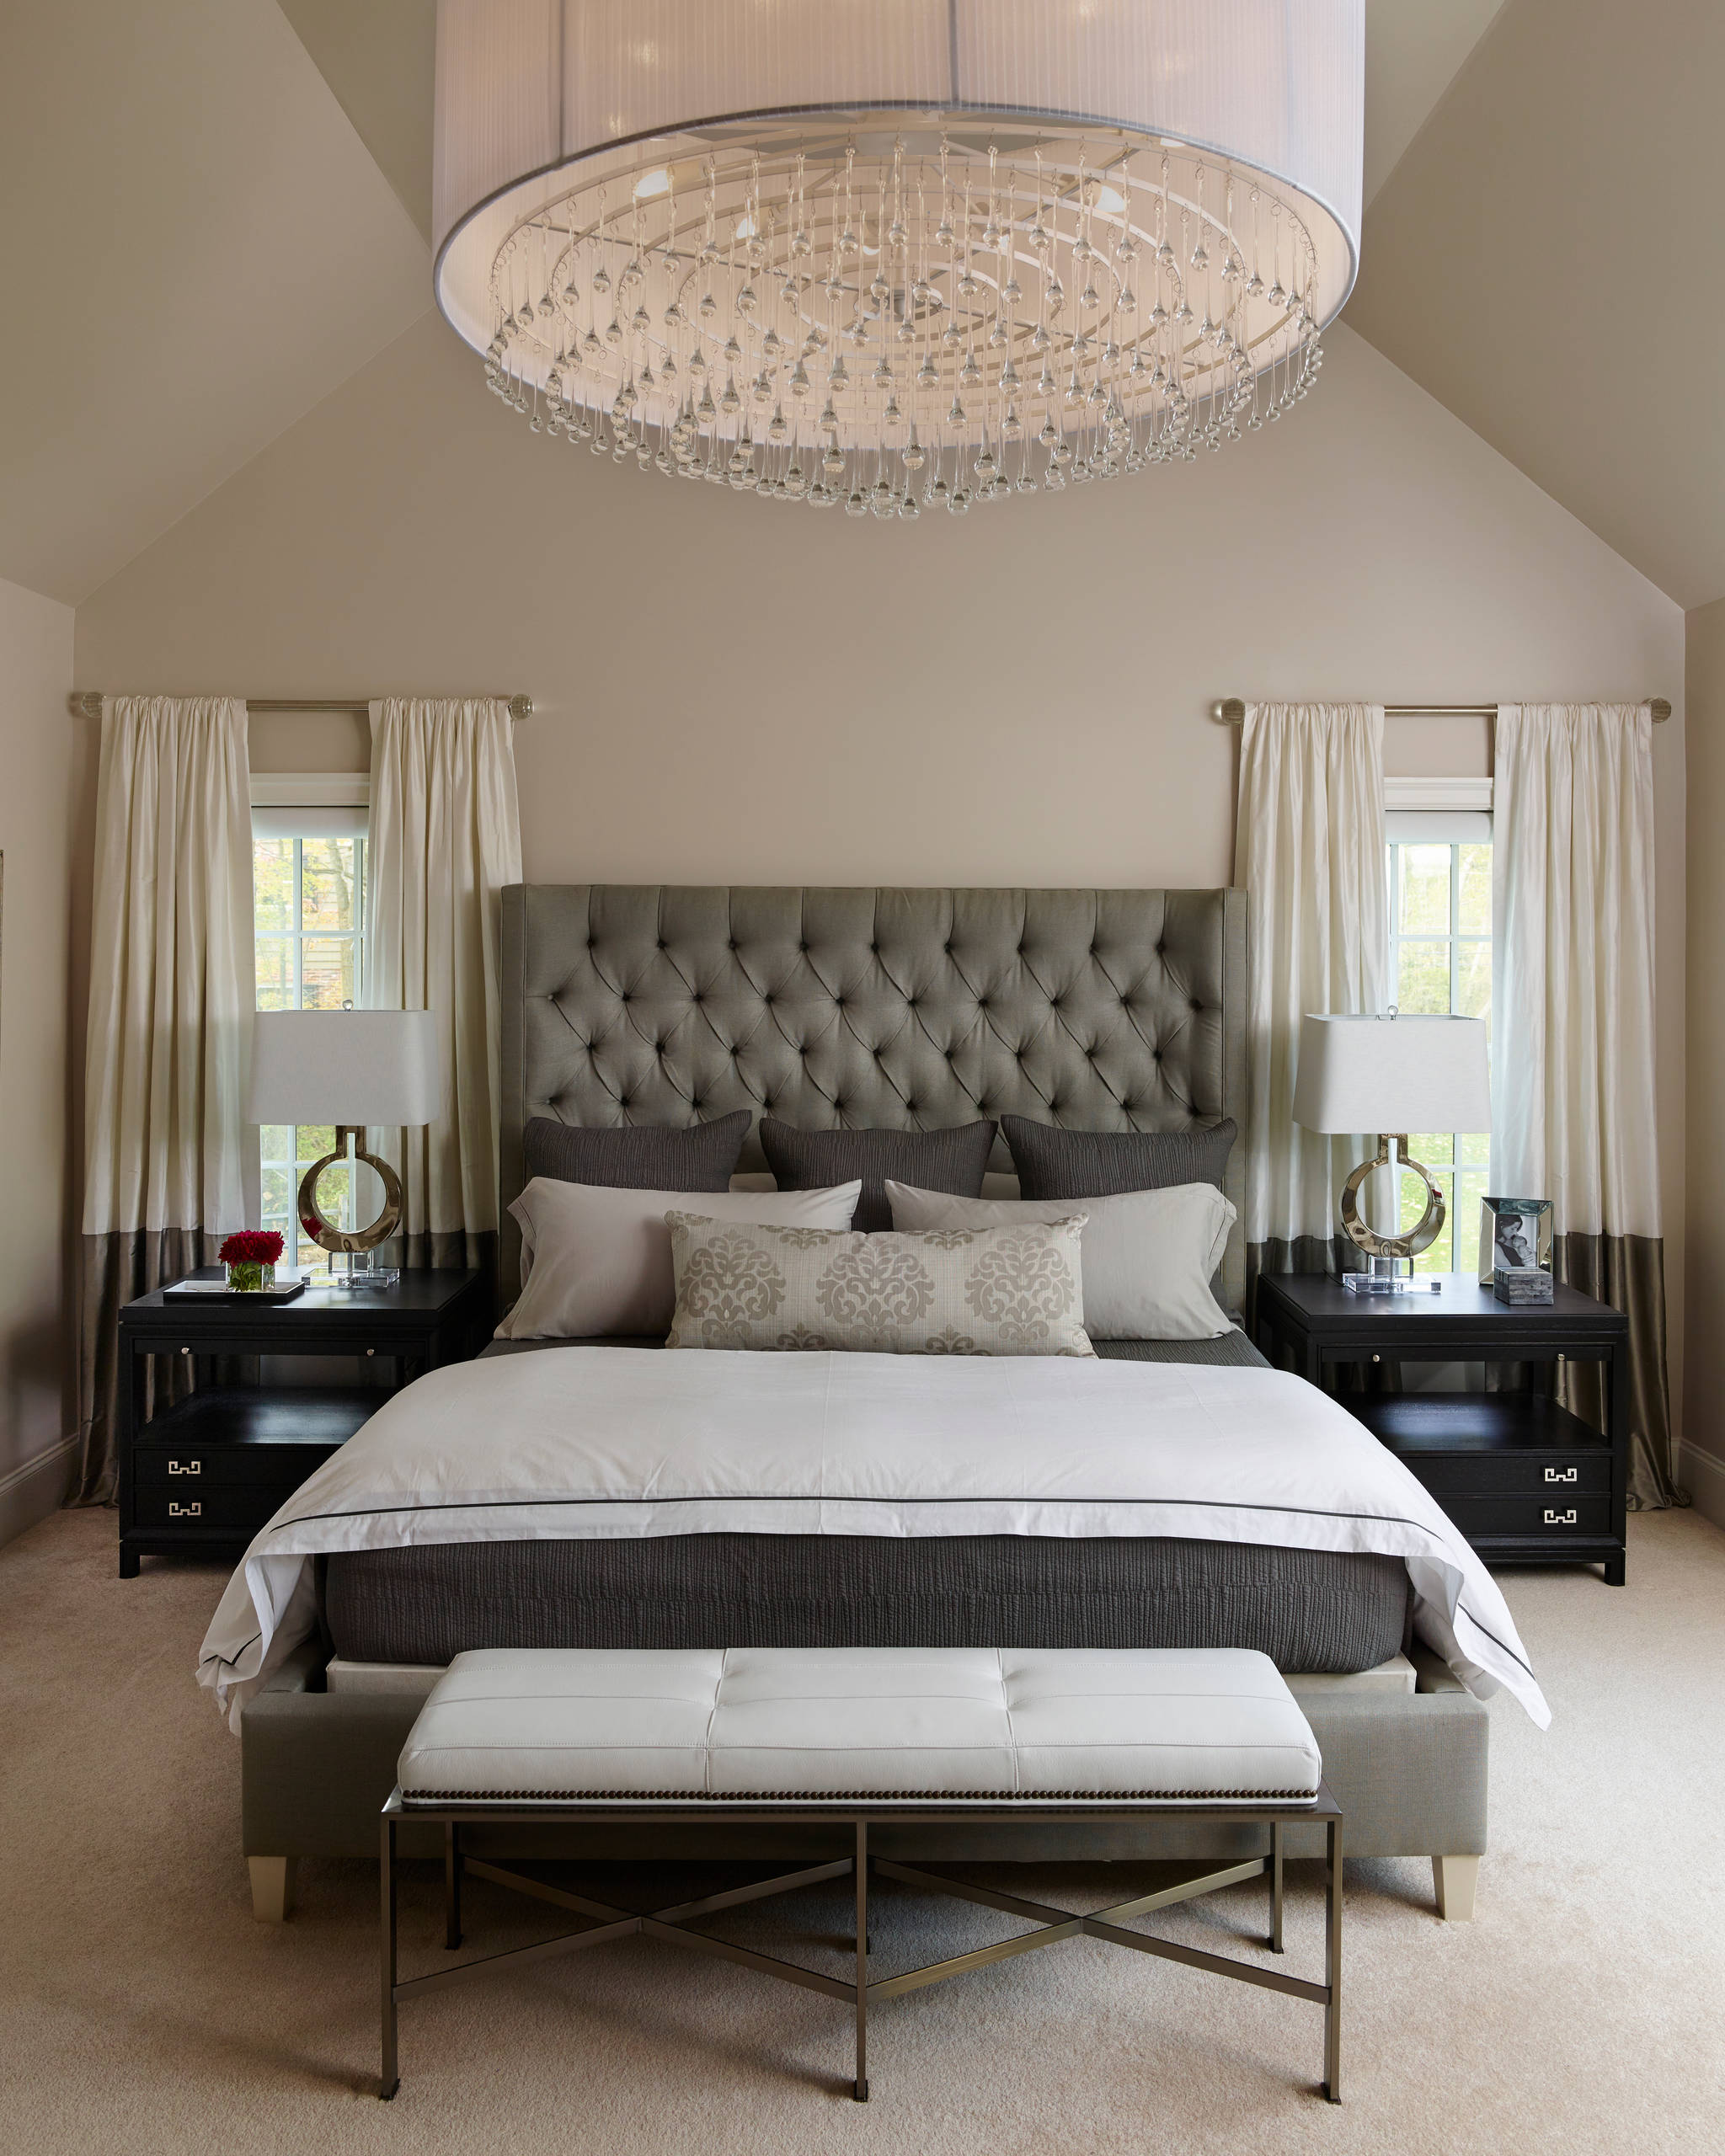 Featured image of post Beige Upholstered Headboard Bedroom Ideas - Upholstered headboards are an easy update to the bedroom that make a big impact.